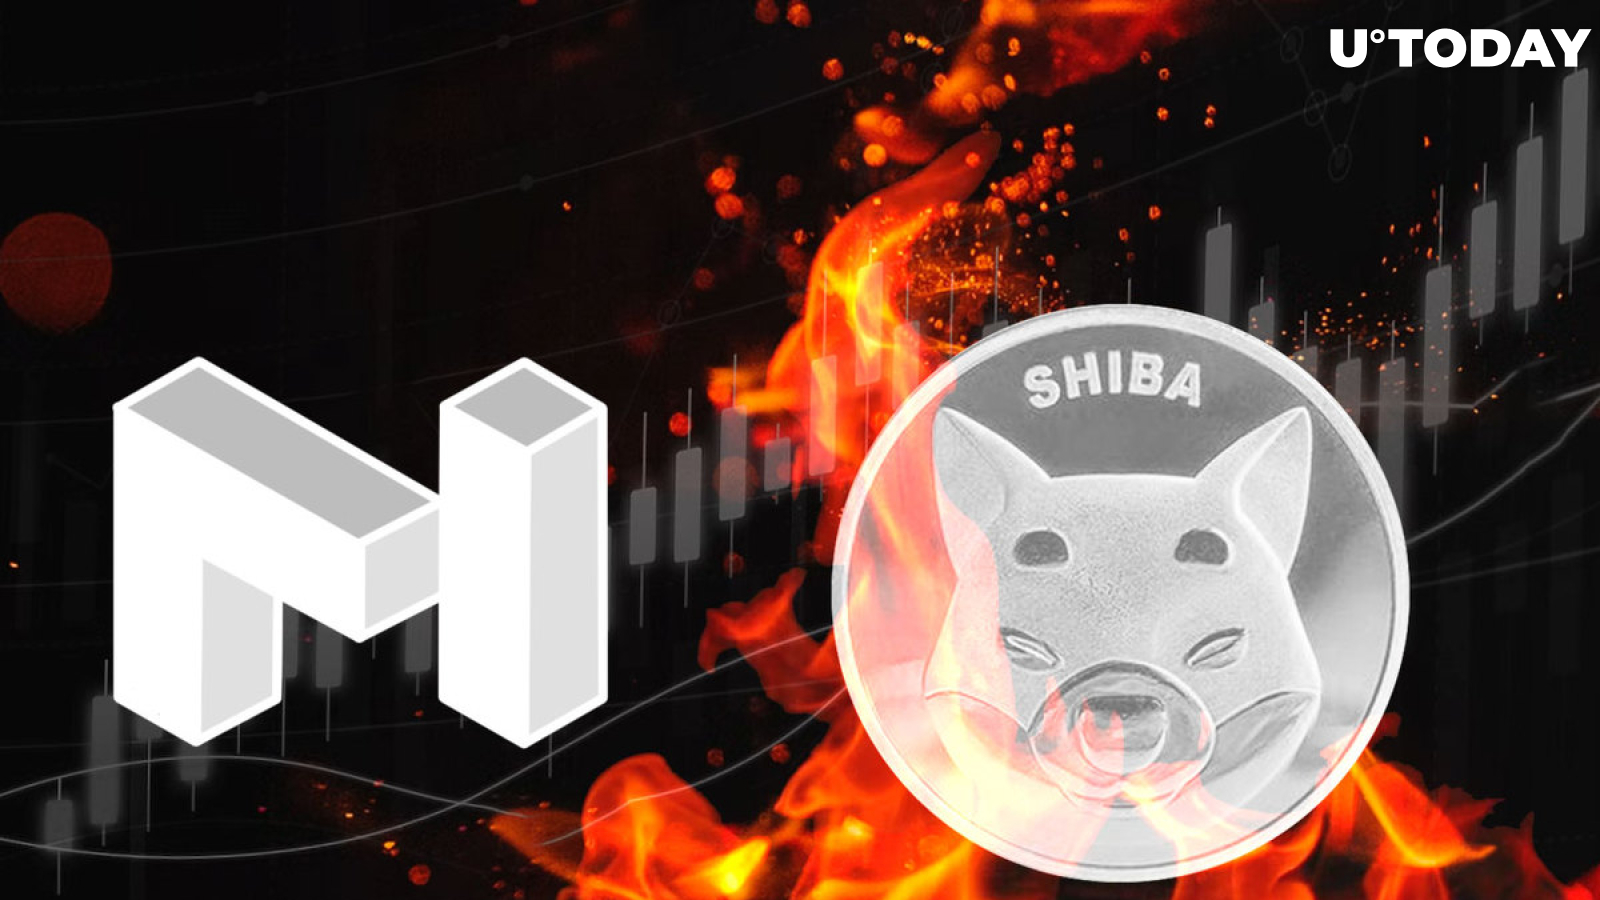 Shiba Inu Burned Coins Exceed Market Cap of MATIC with $4 Billion Worth of Tokens Destroyed